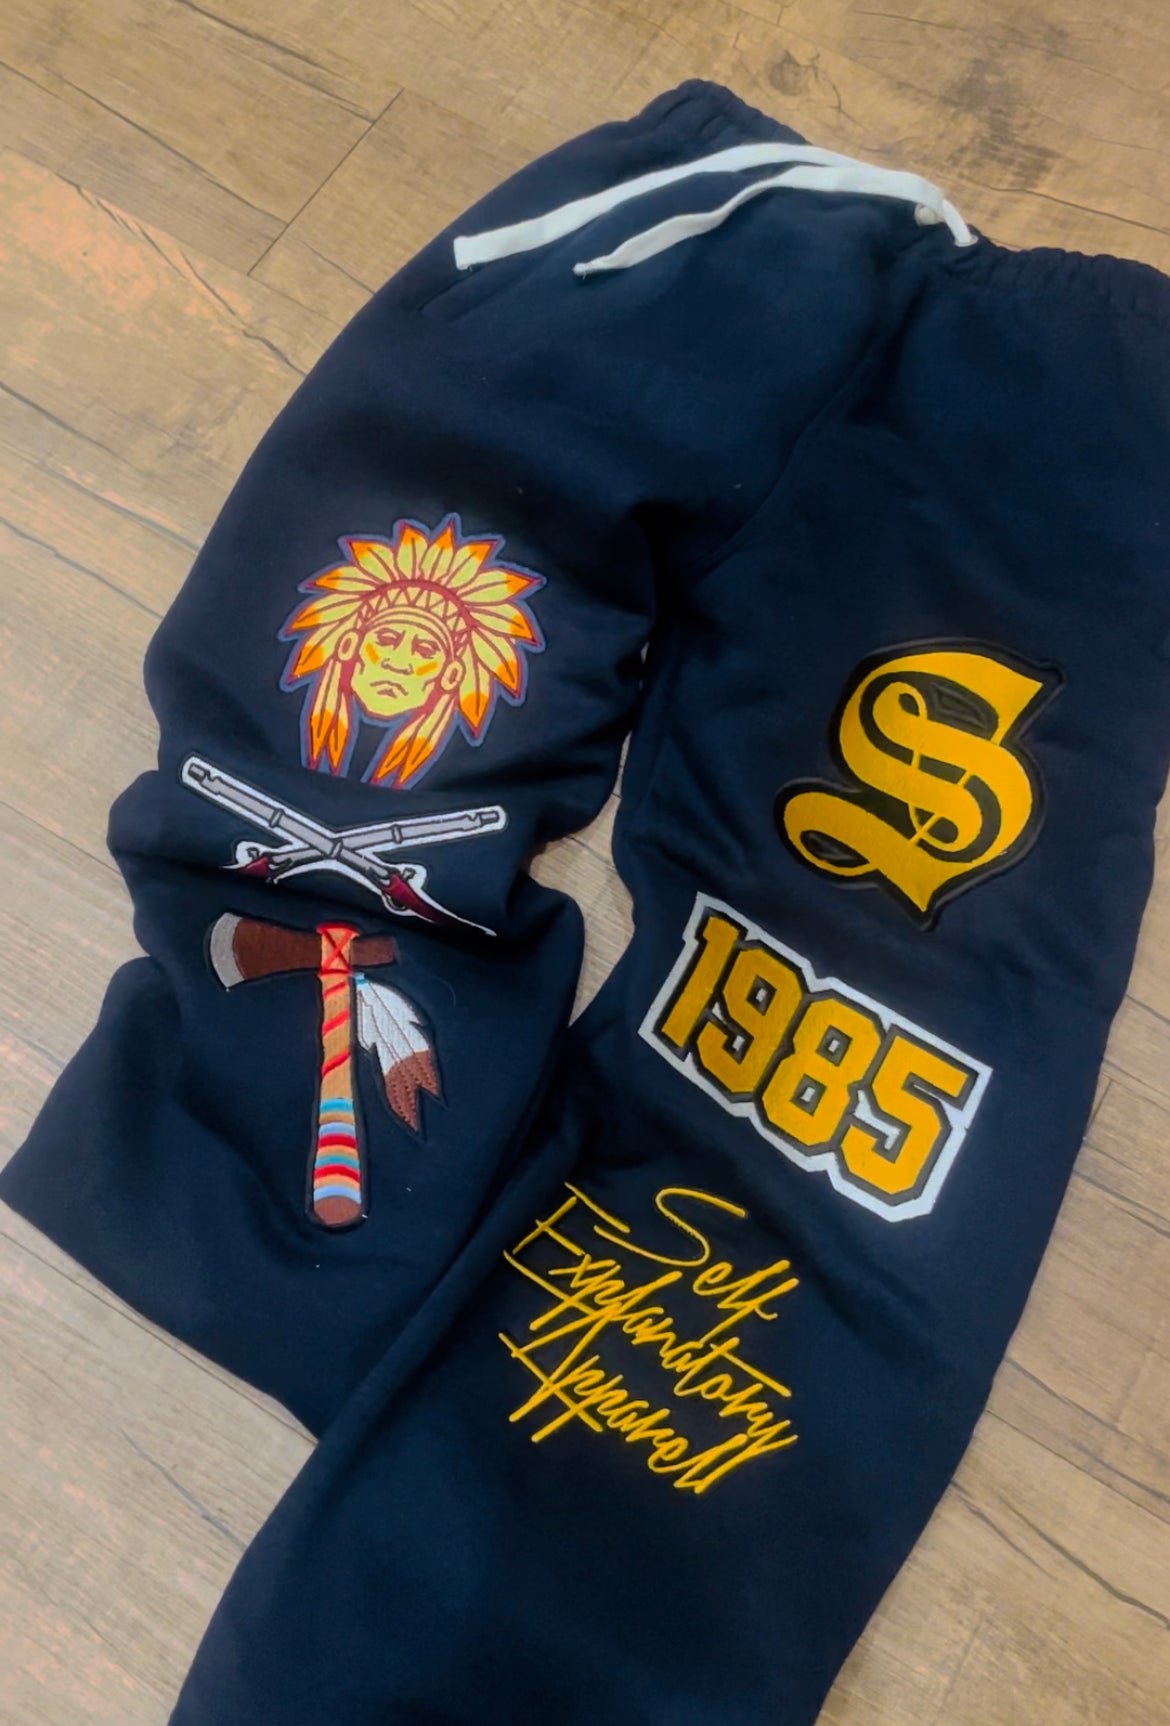 VINTAGE RUGBY PATCHWORK SWEATS